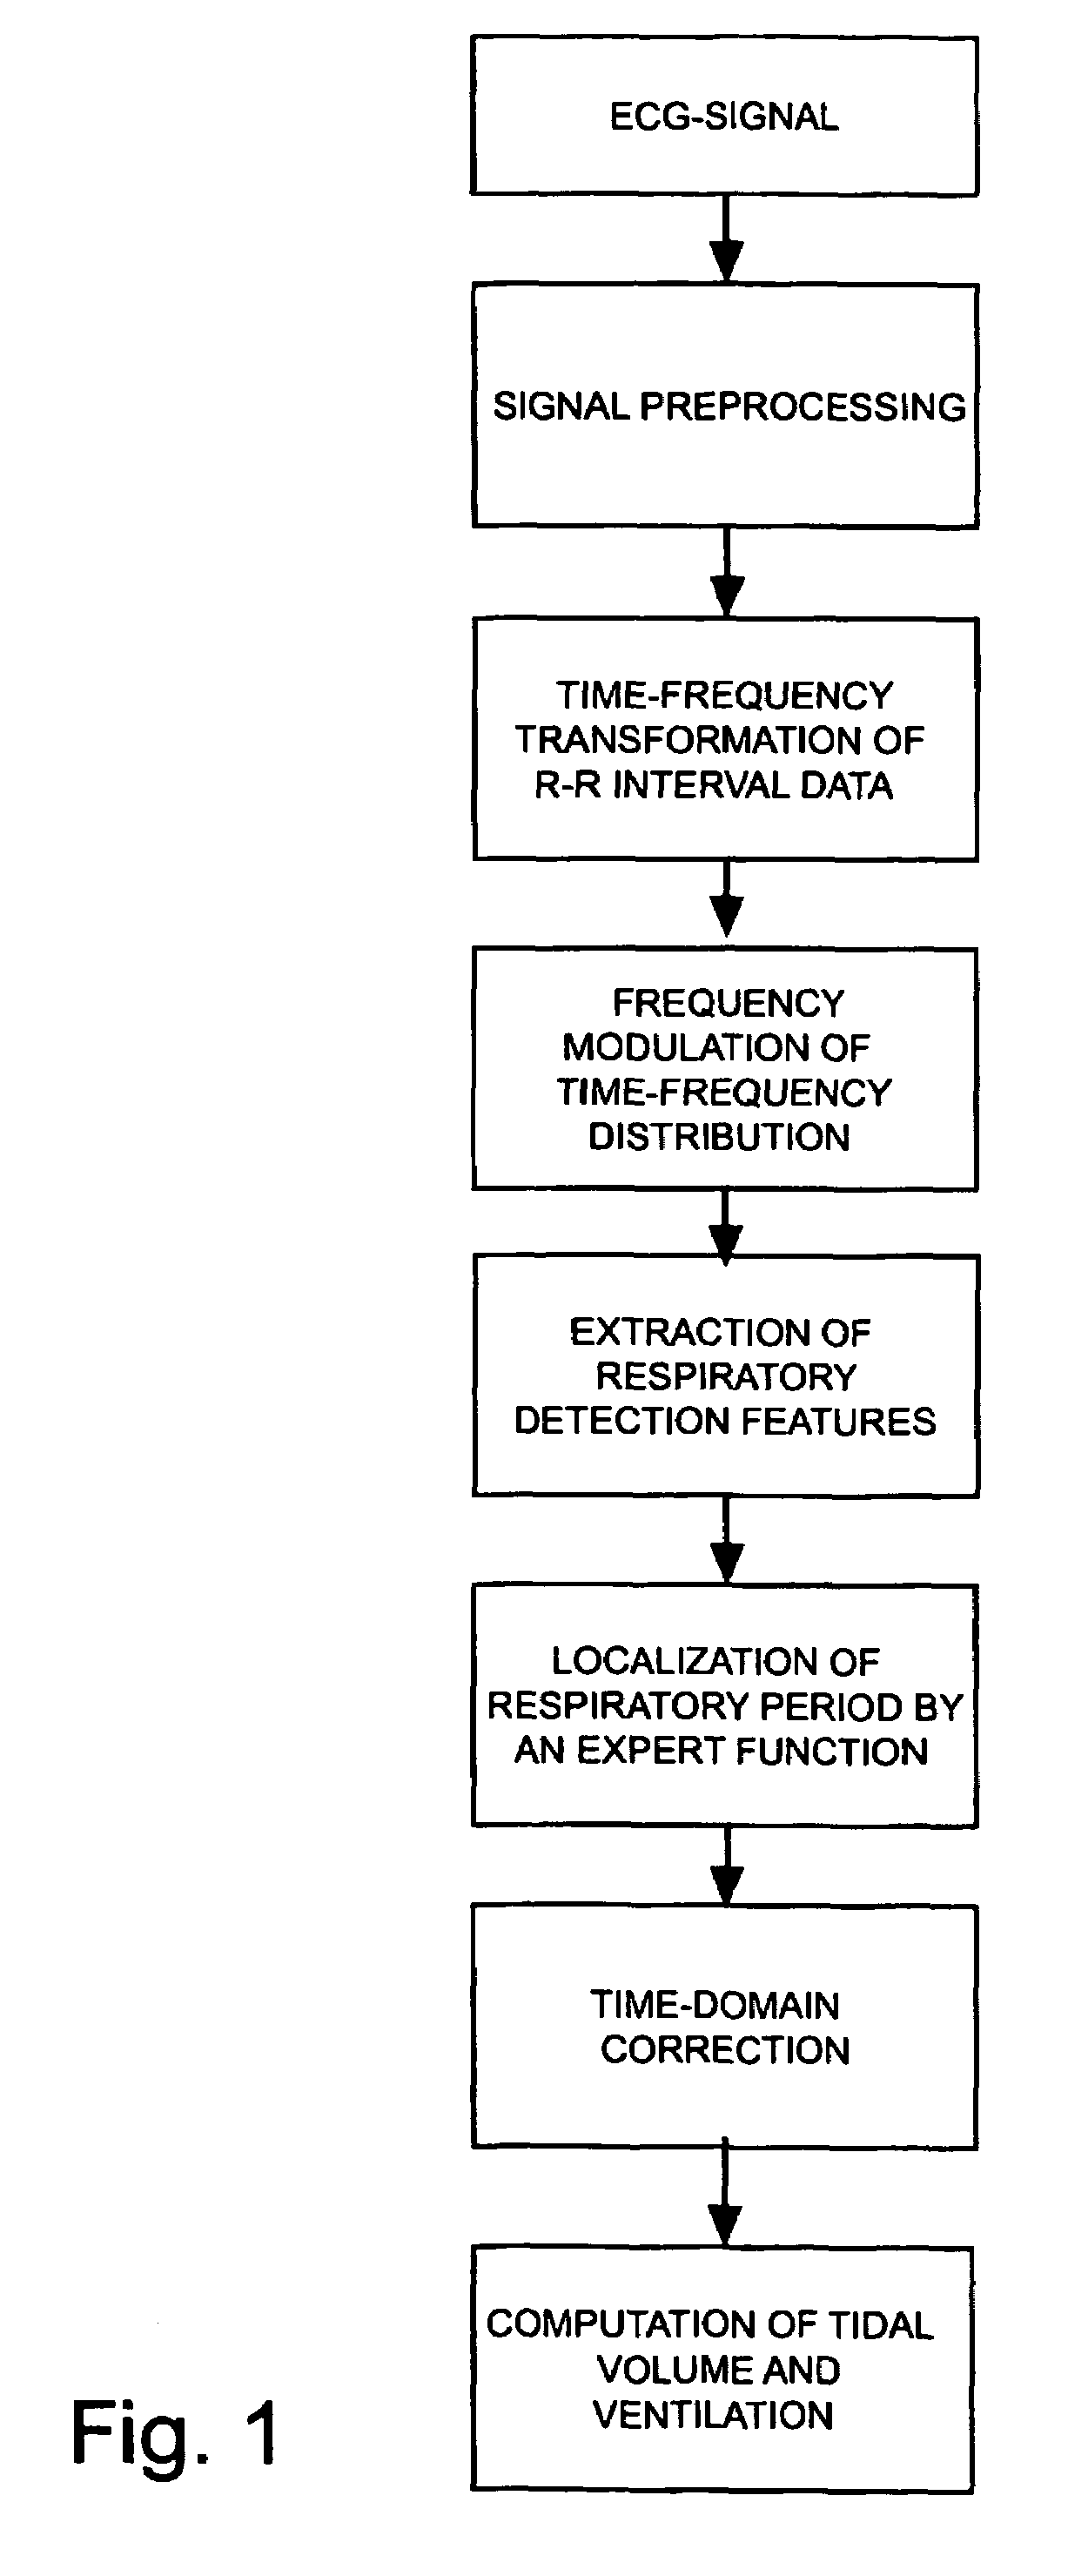 Procedure for deriving reliable information on respiratory activity from heart period measurement